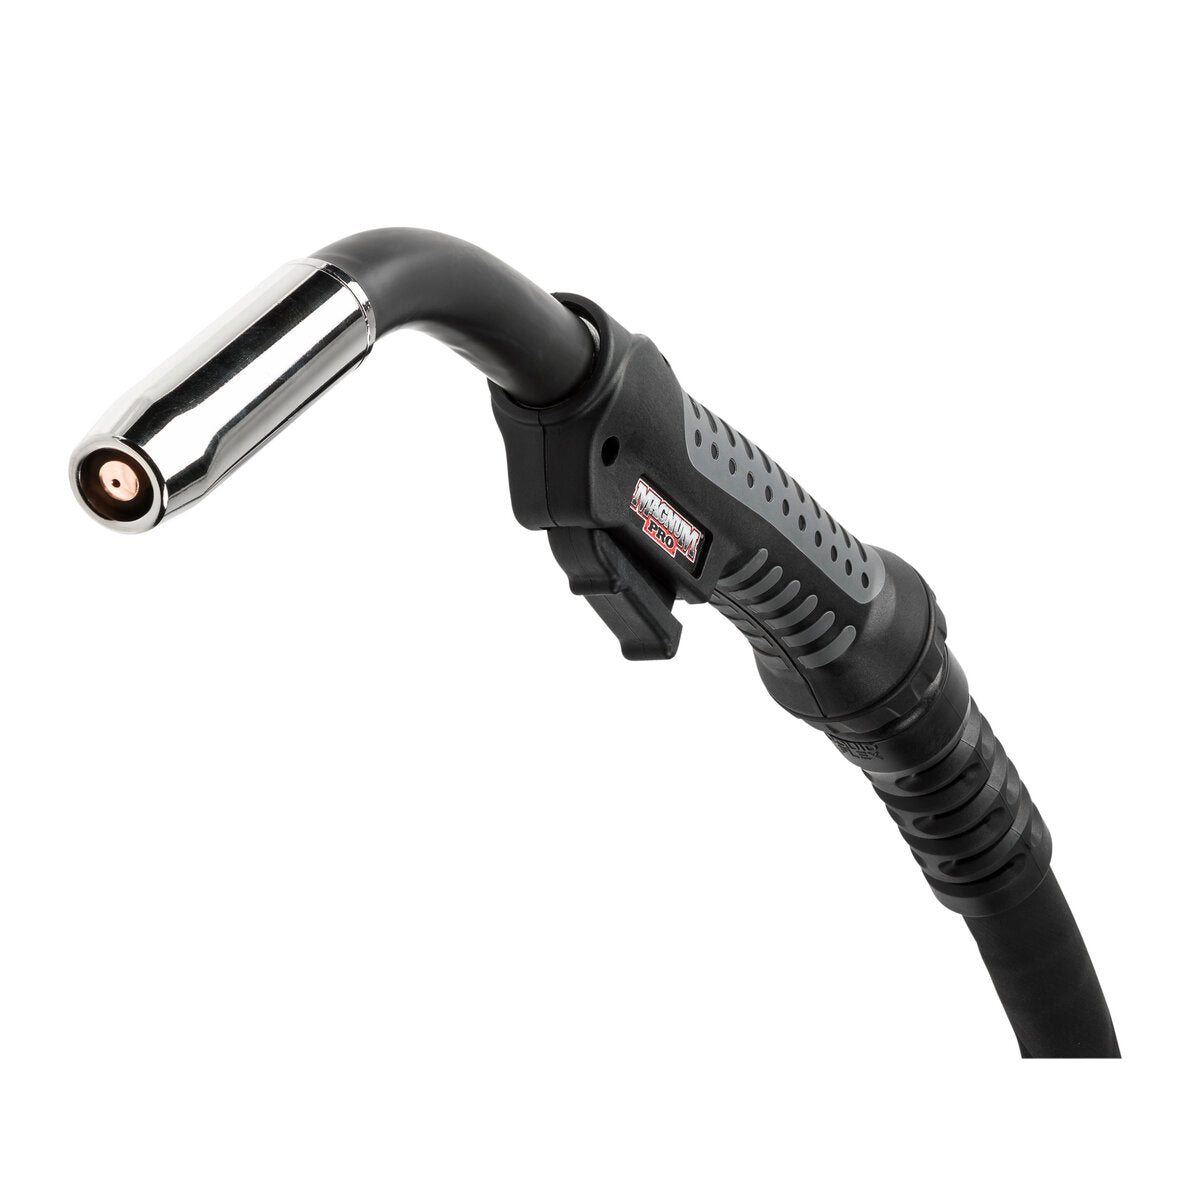 Lincoln Electric - Magnum® PRO 500 Water Cooled Welding Guns - K4522-4-FM-45